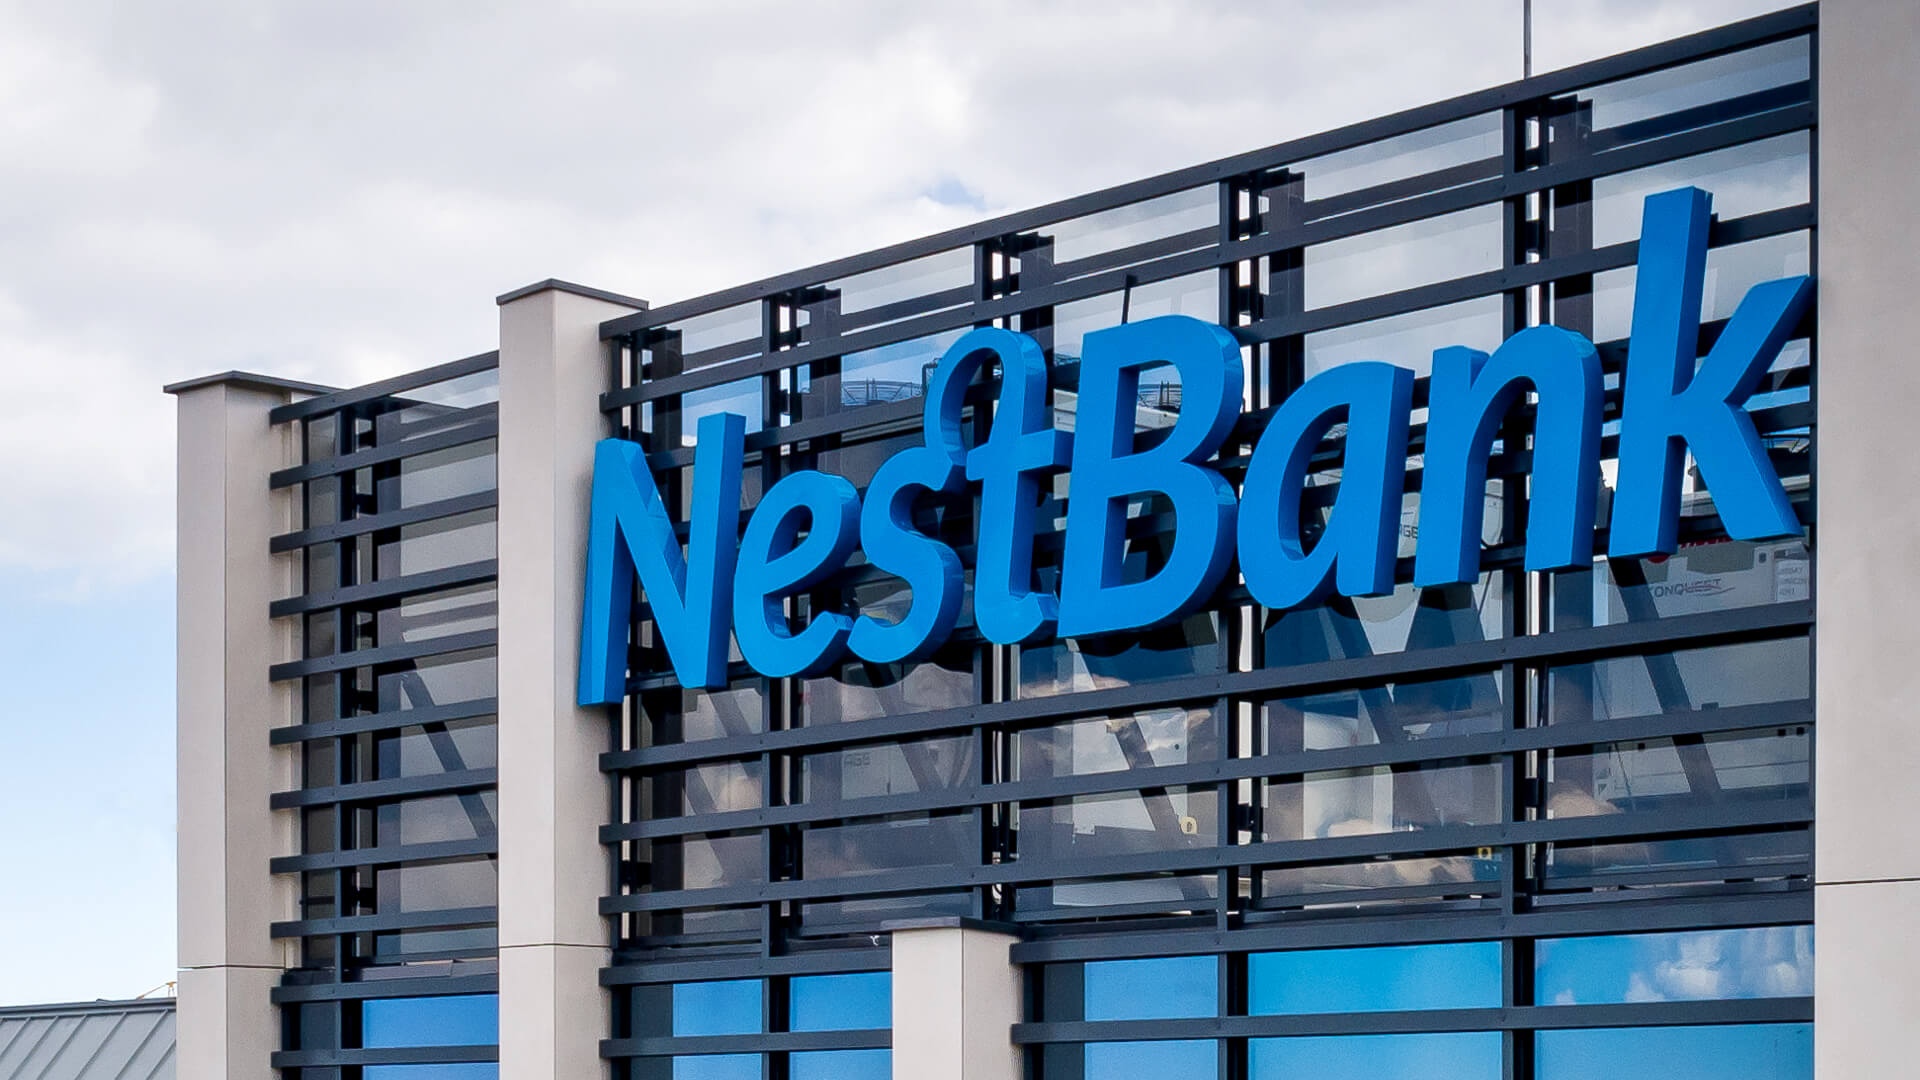 nestbank  - advertising-nest-bank-letters-3d-on-a-building-letter-nest-bank